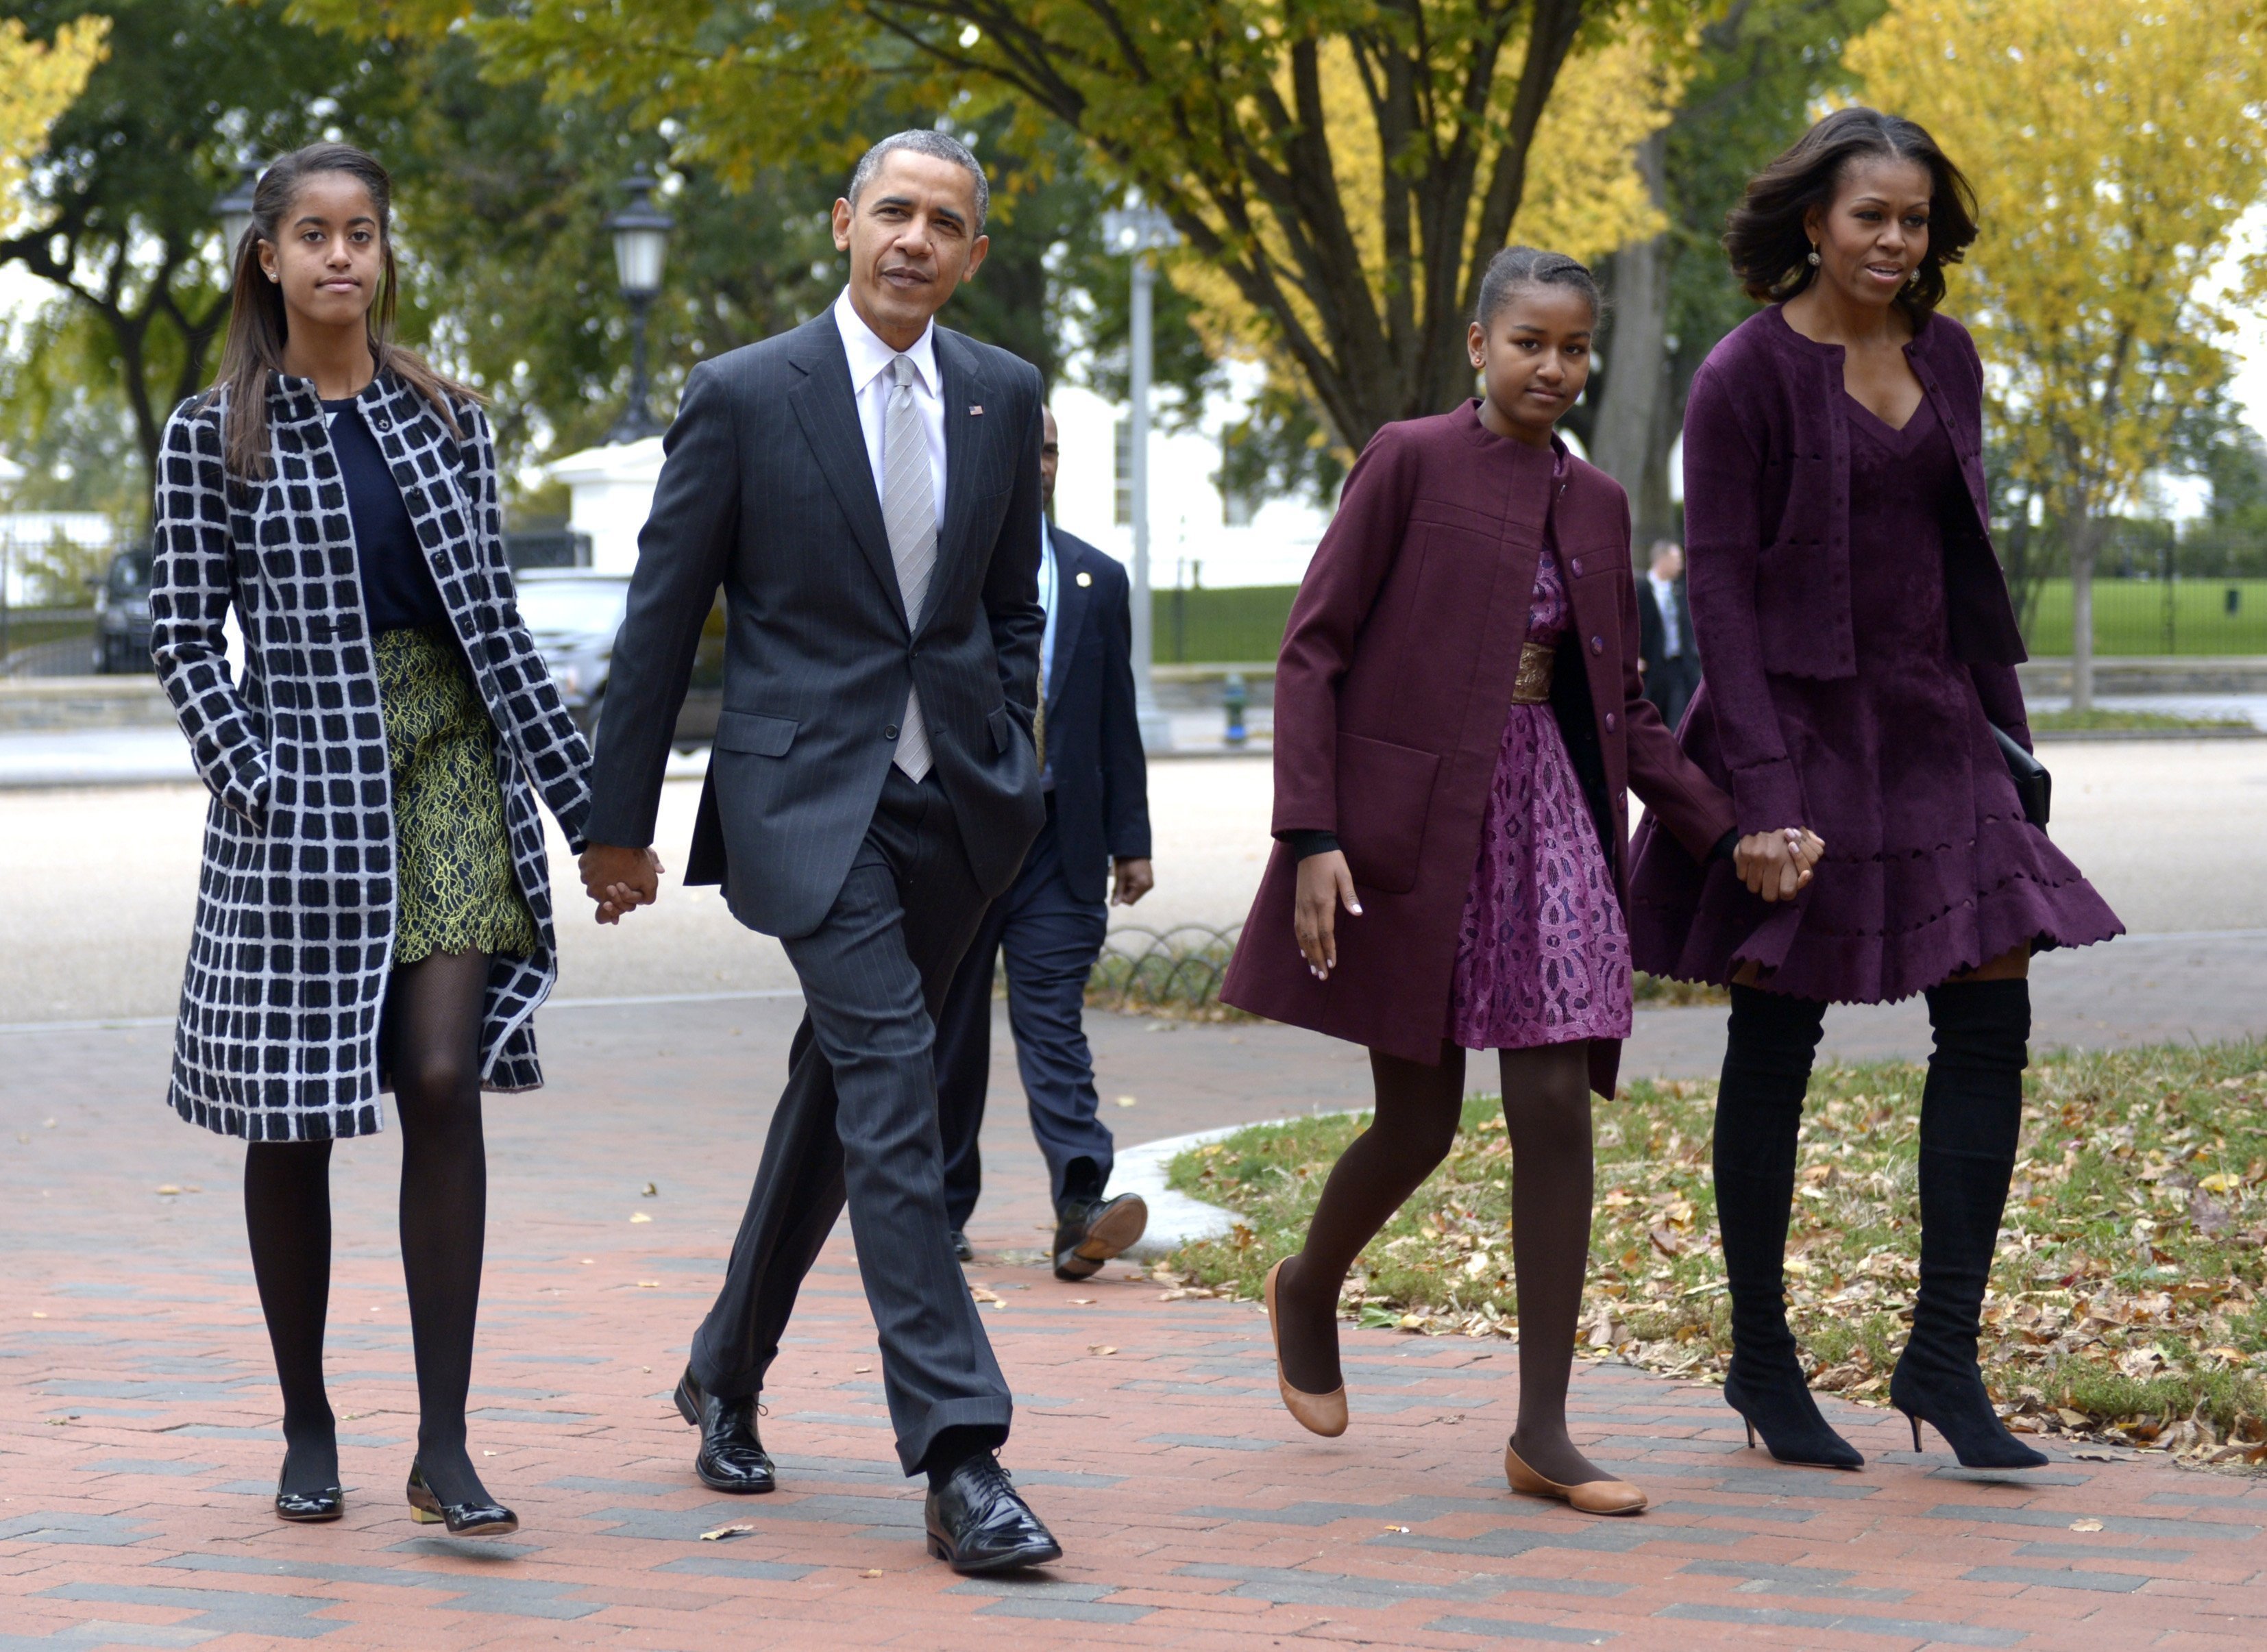 The Obamas walk through Lafayette Park to St John's Church, October 2013. | Photo: GettyImages/Global Images of Ukraine